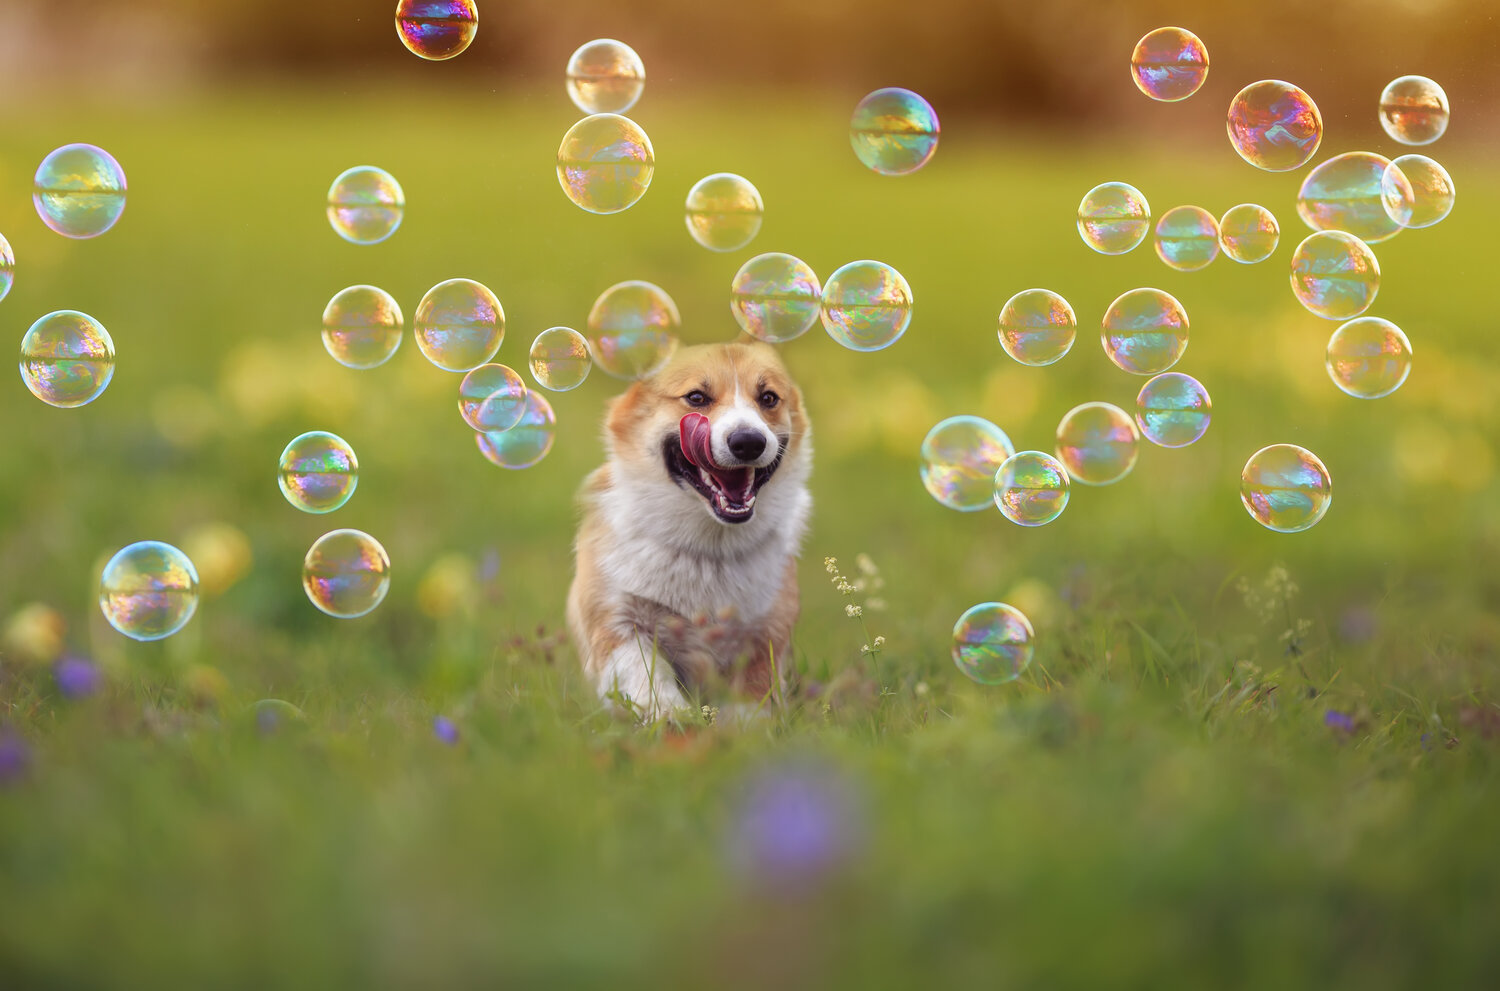 25 Fun and Heartwarming Dog Photo Ideas You’ve Never Tried